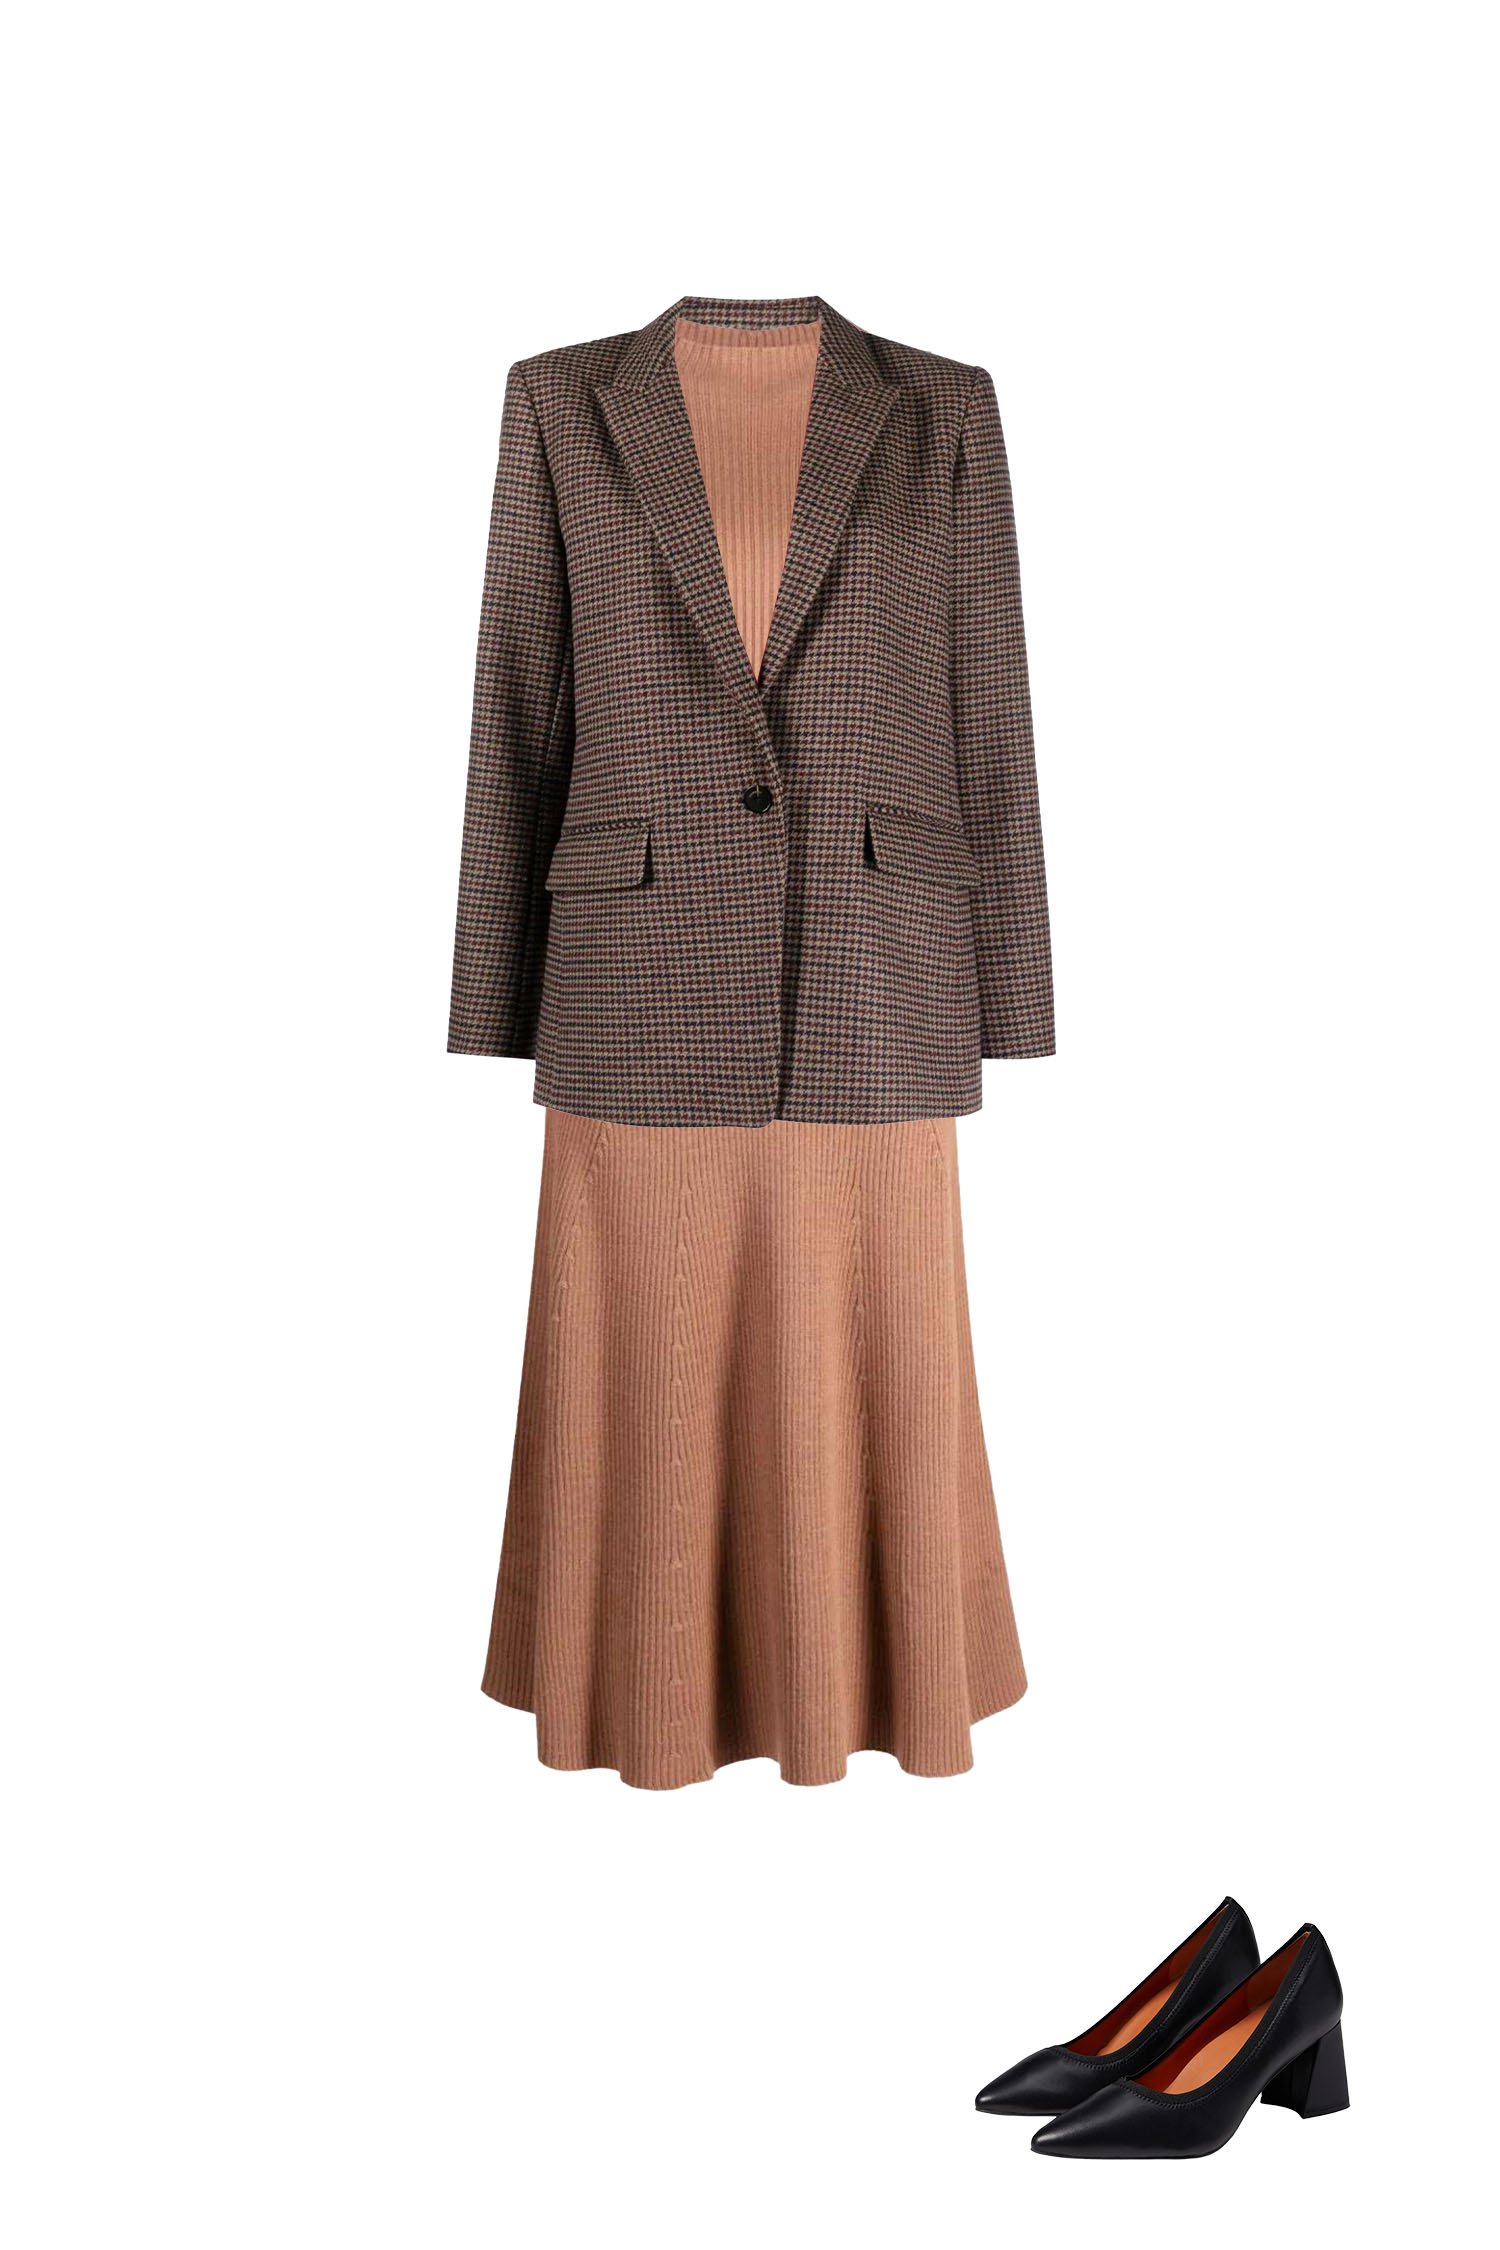 Business Casual Outfit - Camel Ribbed Knitted Midi Dress, Brown Houndstooth Blazer, Black Block Heel Pumps